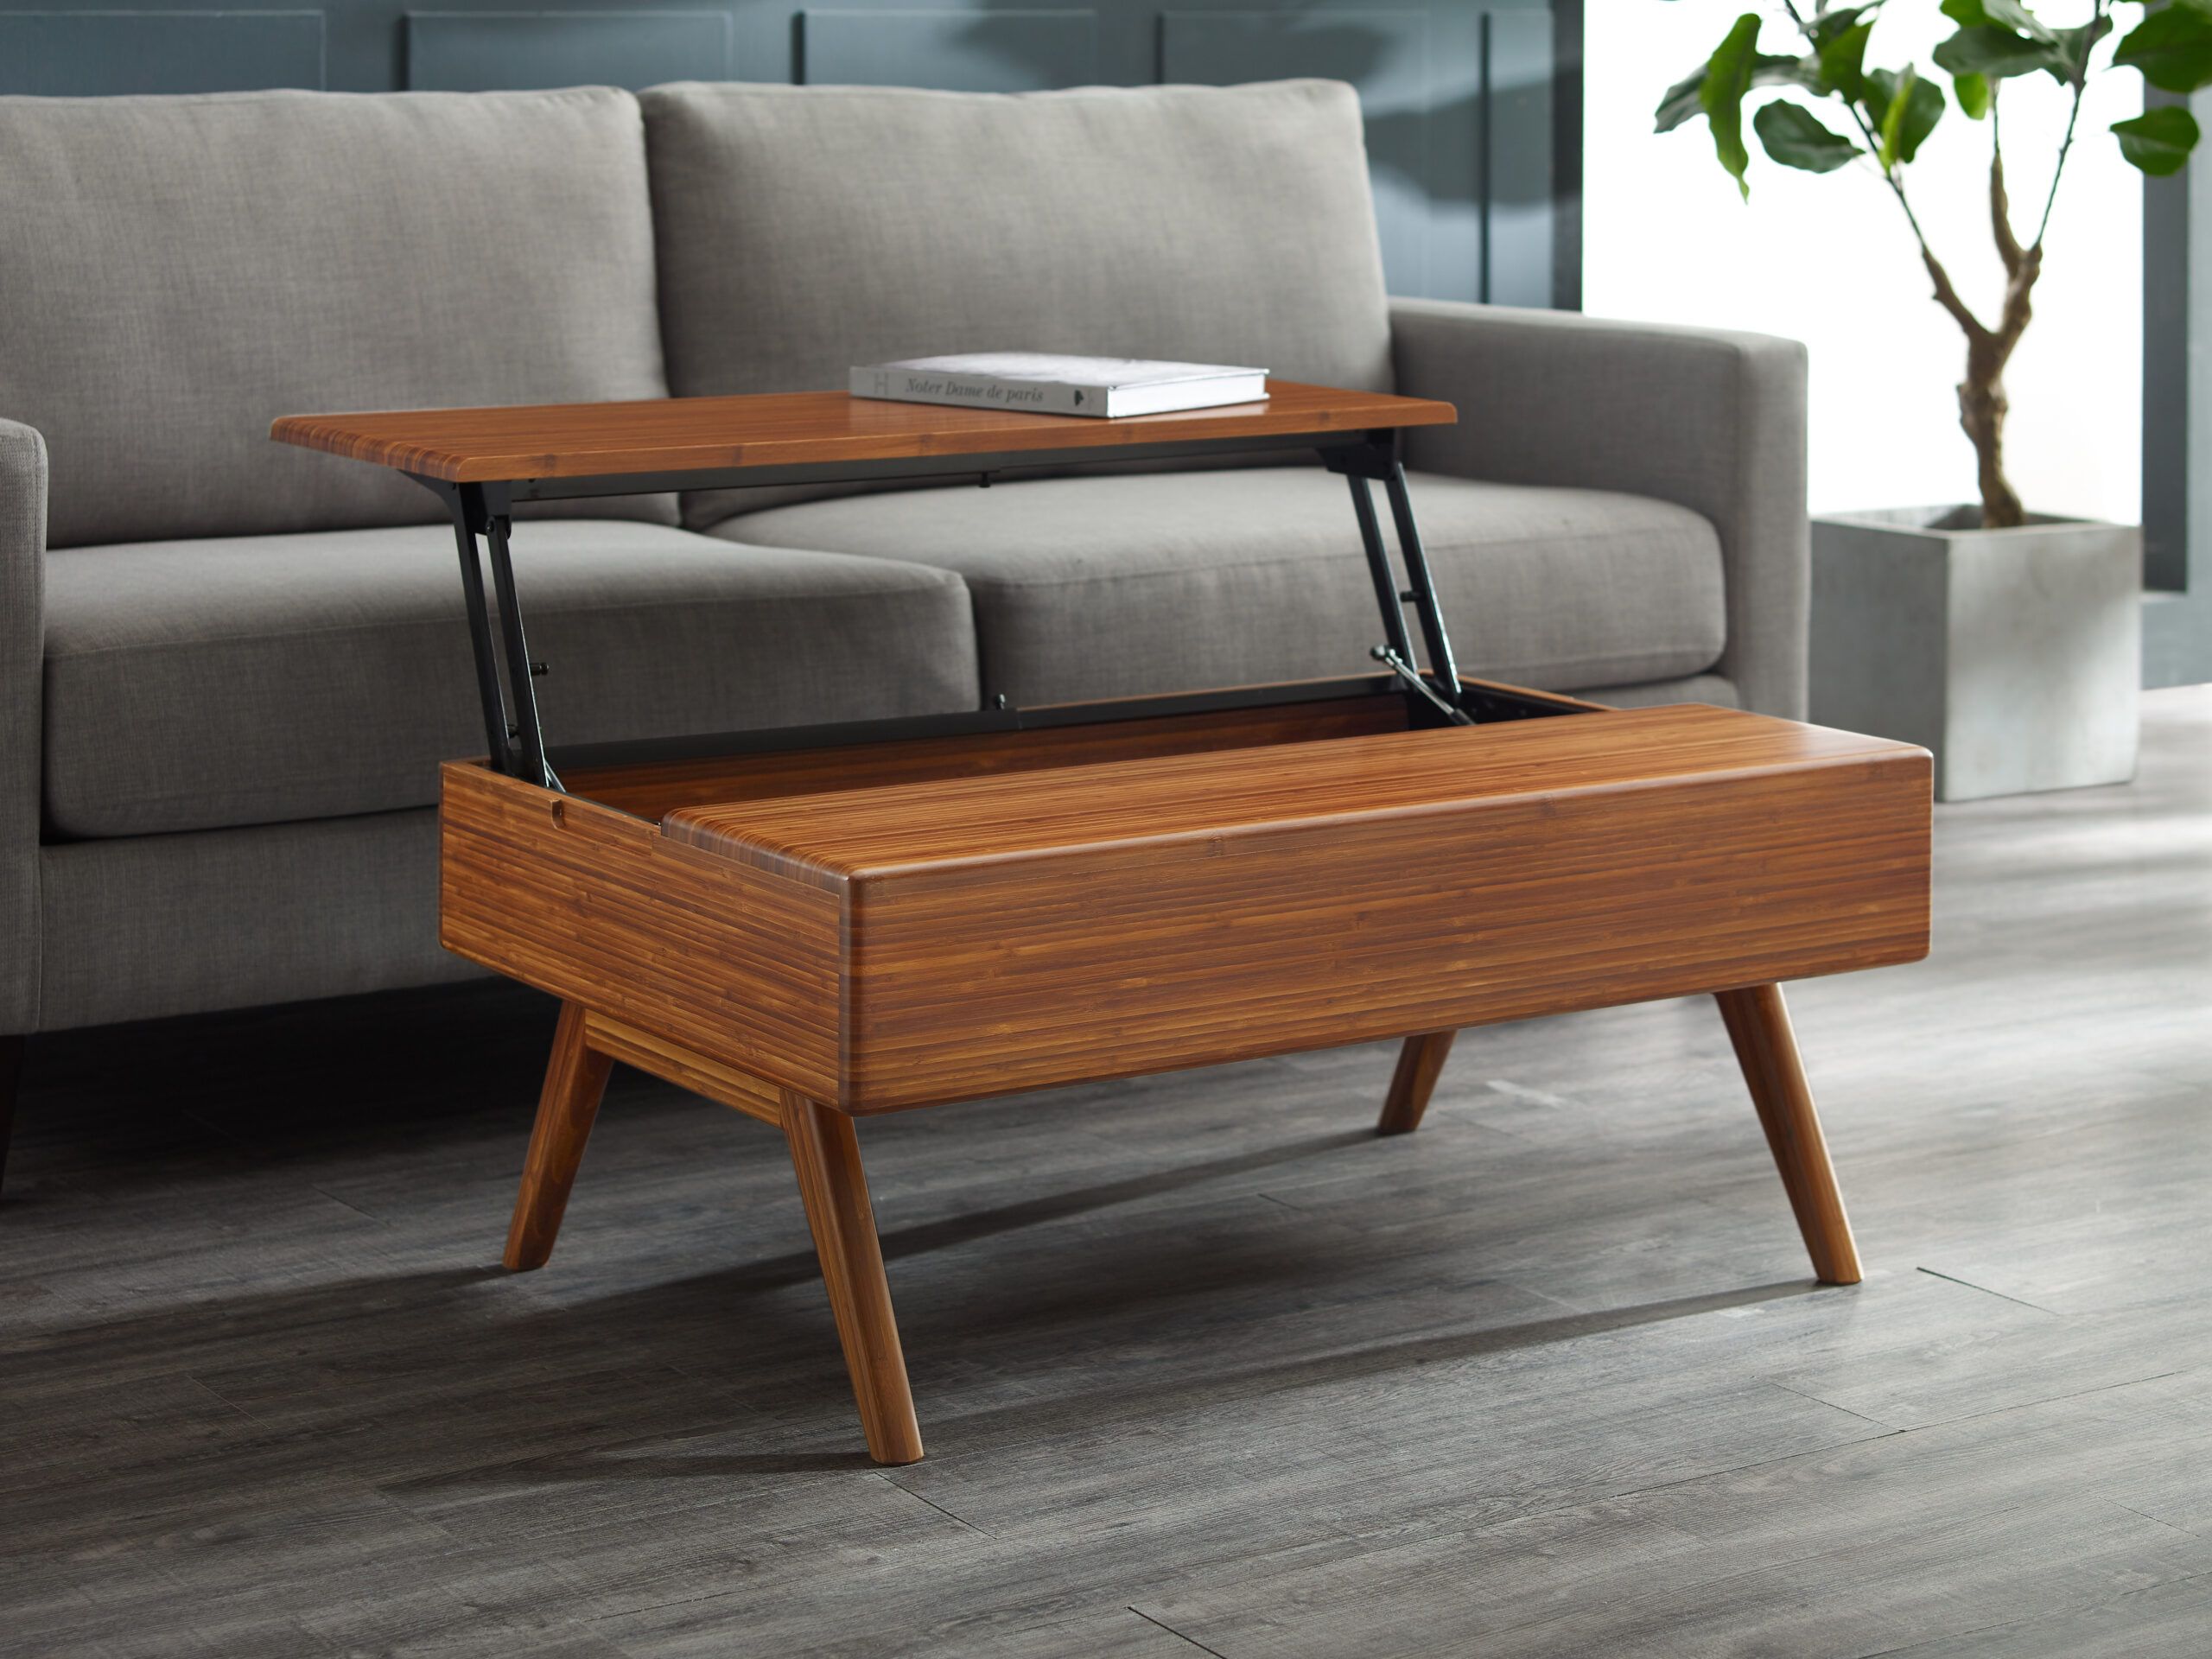 Rhody Lift Top Coffee Table | Greenington | Bedrooms & More Within Modern Wooden Lift Top Tables (View 5 of 15)